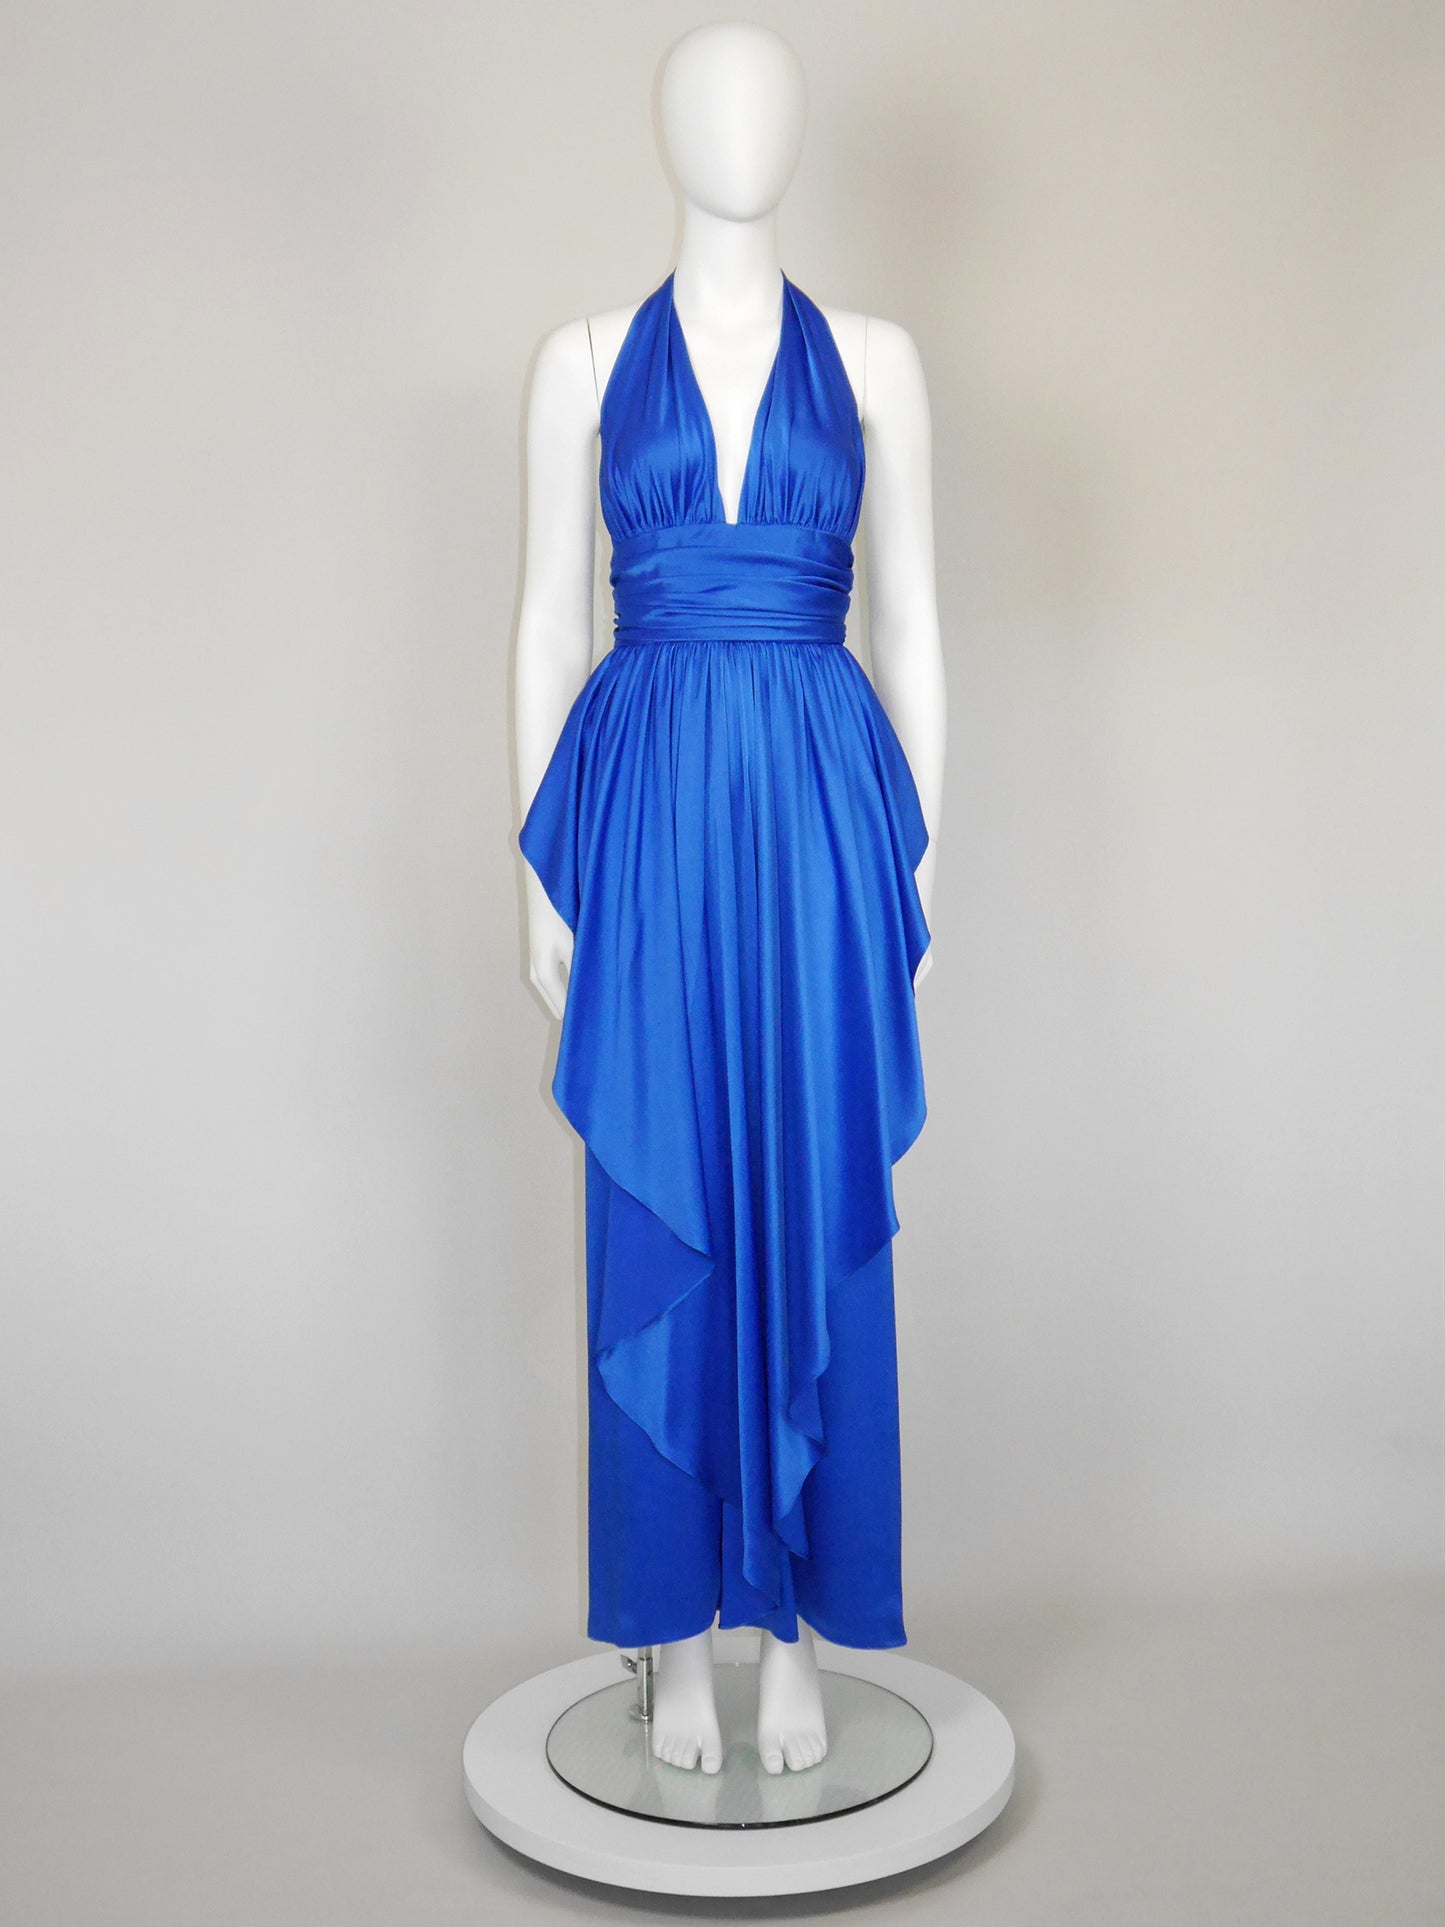 FRANK USHER London 1980s Vintage Electric Blue Maxi Evening Goddess Gown Size XS